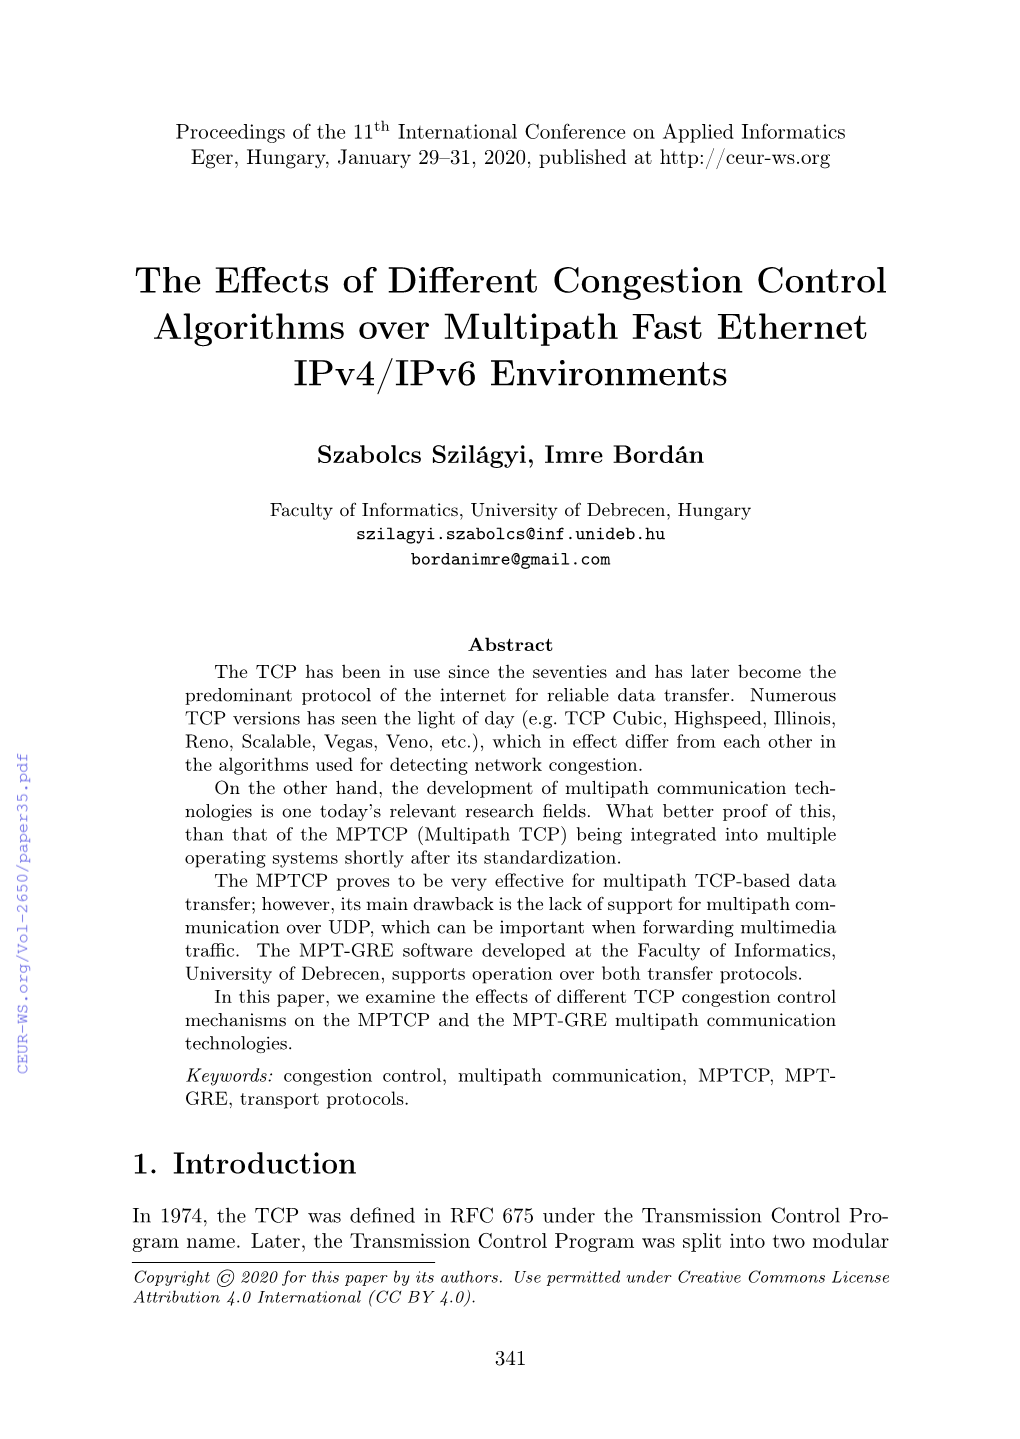 The Effects of Different Congestion Control Algorithms Over Multipath Fast Ethernet Ipv4/Ipv6 Environments